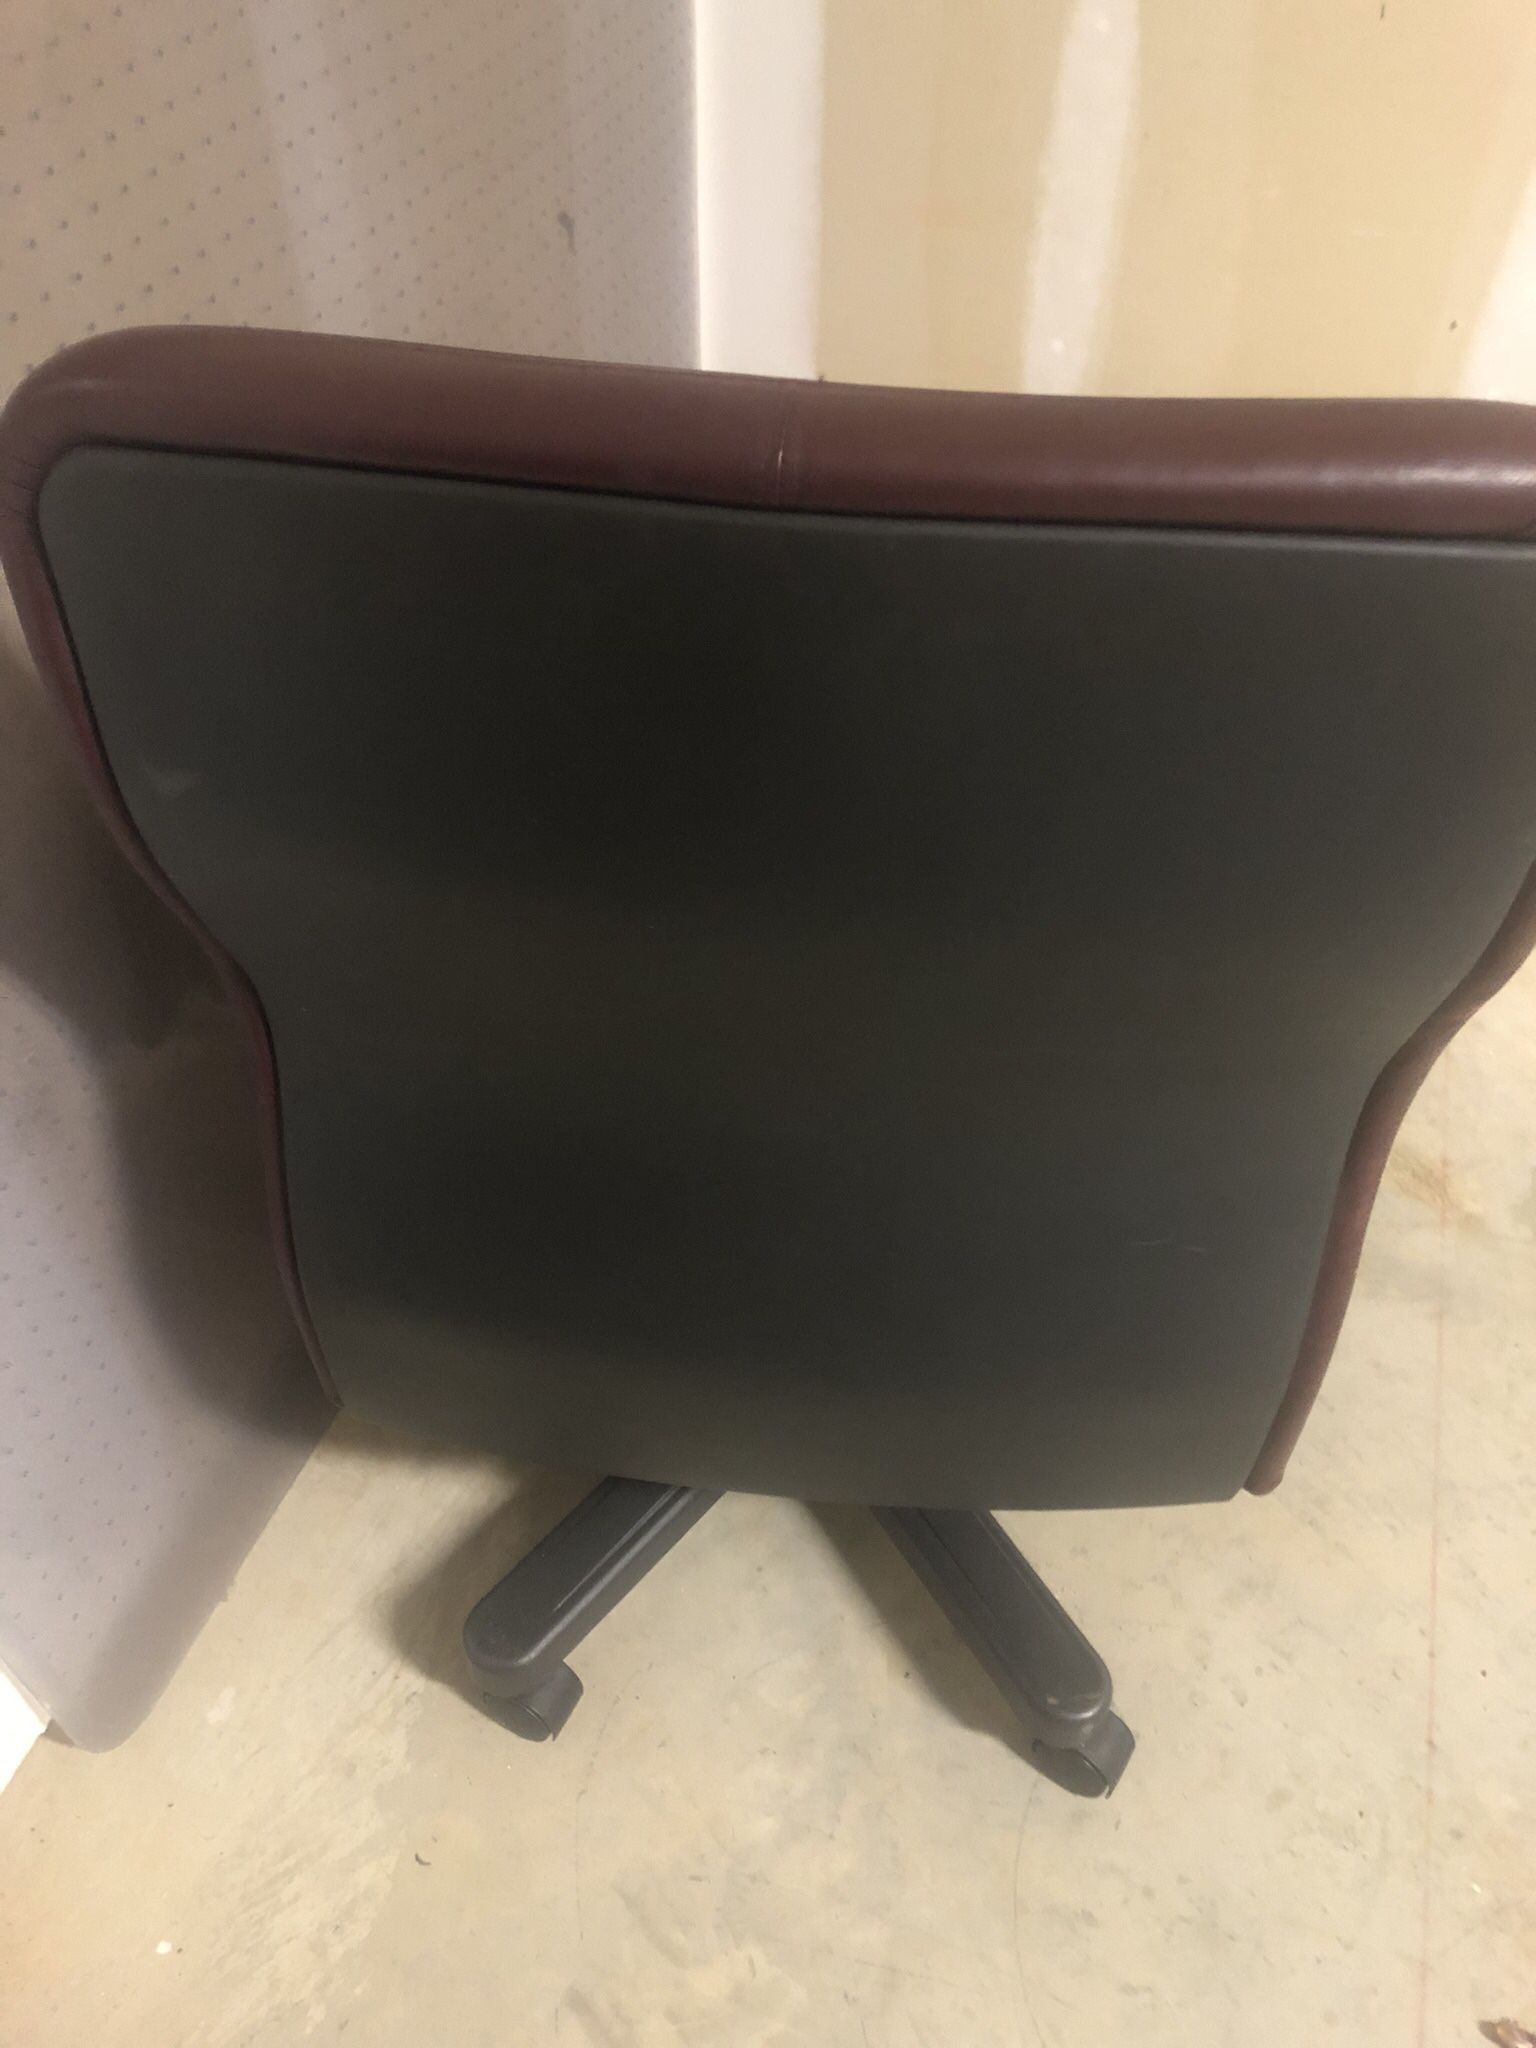 Burgundy Leather Office Chair W/mat